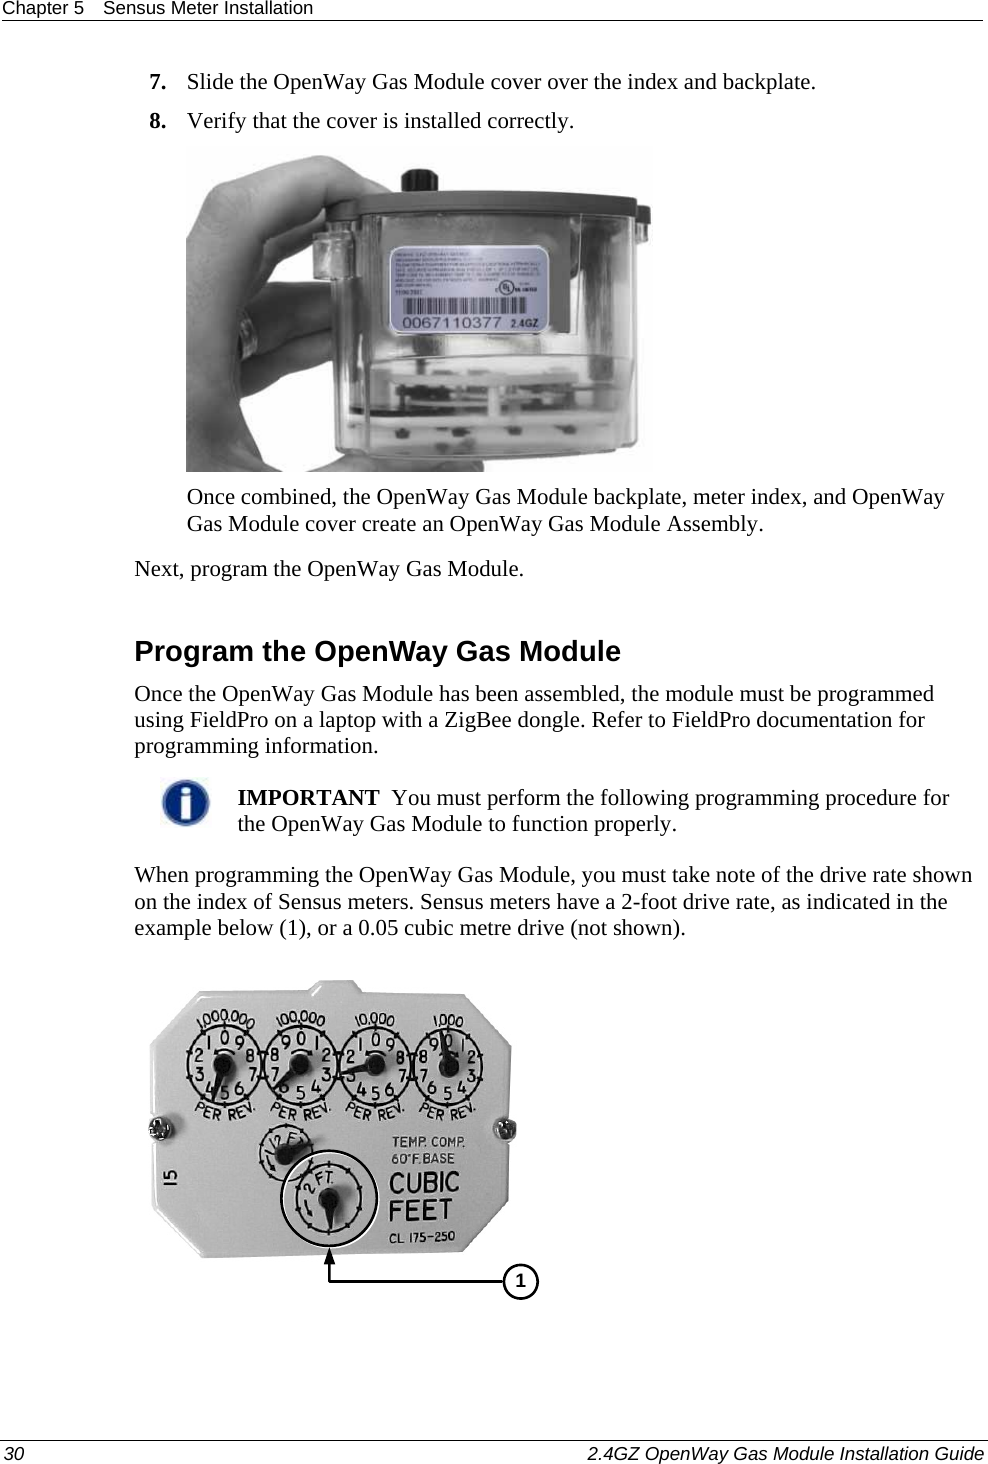 Chapter 5  Sensus Meter Installation  30    2.4GZ OpenWay Gas Module Installation Guide  7. Slide the OpenWay Gas Module cover over the index and backplate.  8. Verify that the cover is installed correctly.   Once combined, the OpenWay Gas Module backplate, meter index, and OpenWay Gas Module cover create an OpenWay Gas Module Assembly. Next, program the OpenWay Gas Module.  Program the OpenWay Gas Module Once the OpenWay Gas Module has been assembled, the module must be programmed using FieldPro on a laptop with a ZigBee dongle. Refer to FieldPro documentation for programming information.    IMPORTANT  You must perform the following programming procedure for the OpenWay Gas Module to function properly.  When programming the OpenWay Gas Module, you must take note of the drive rate shown on the index of Sensus meters. Sensus meters have a 2-foot drive rate, as indicated in the example below (1), or a 0.05 cubic metre drive (not shown).   1 